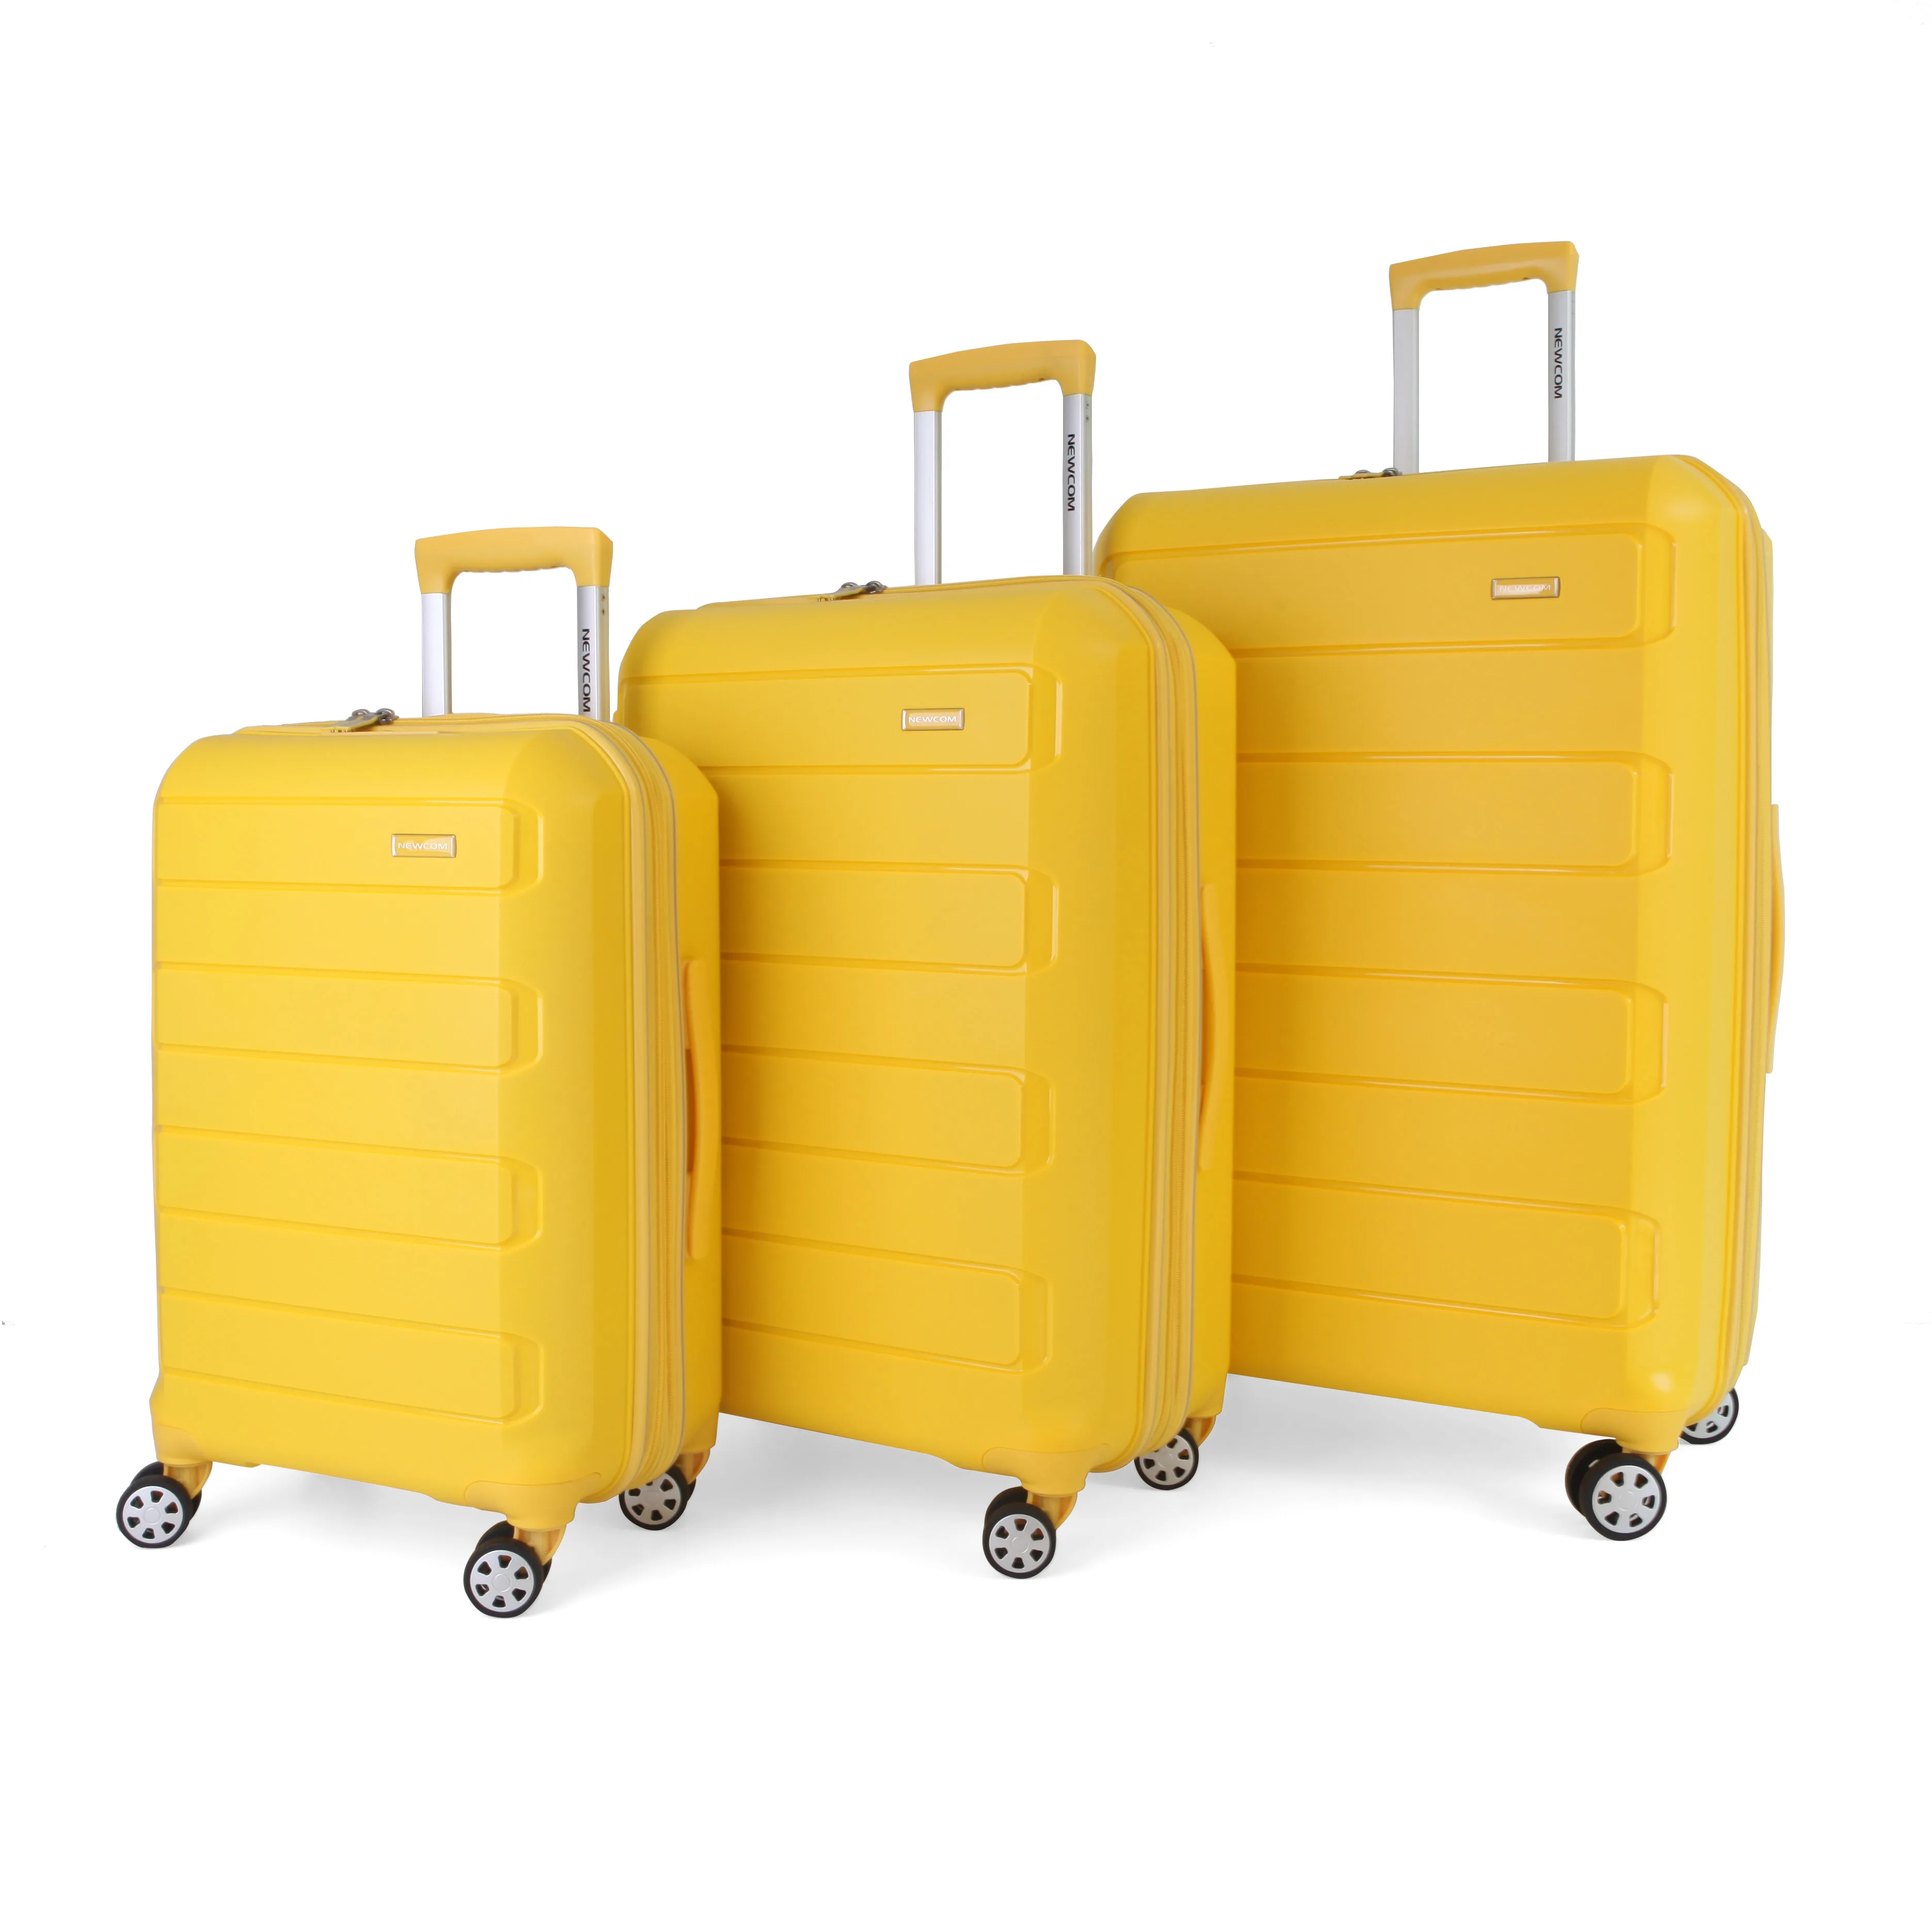 

OEM Promotional PP Spinner Unisex Travelling Bags Luggage Trolley Set Suitcase Luggage Sets On Wheels carry-on luggage, Customized color